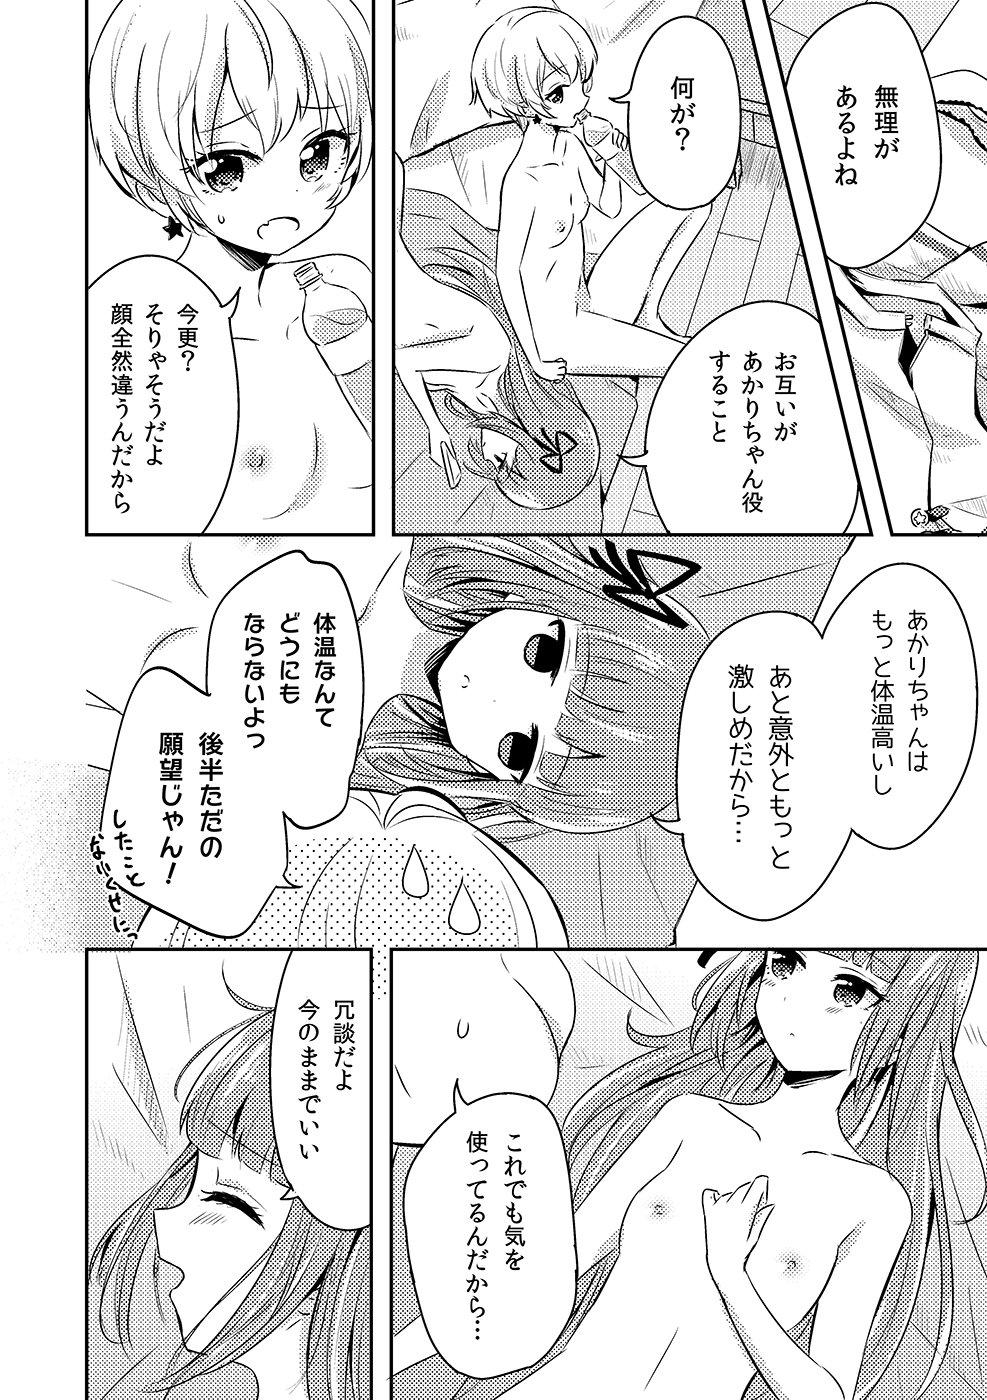 Slim Who contributed to loveless sex joint two years ago! Yuusumi manga. - Aikatsu Titjob - Picture 2